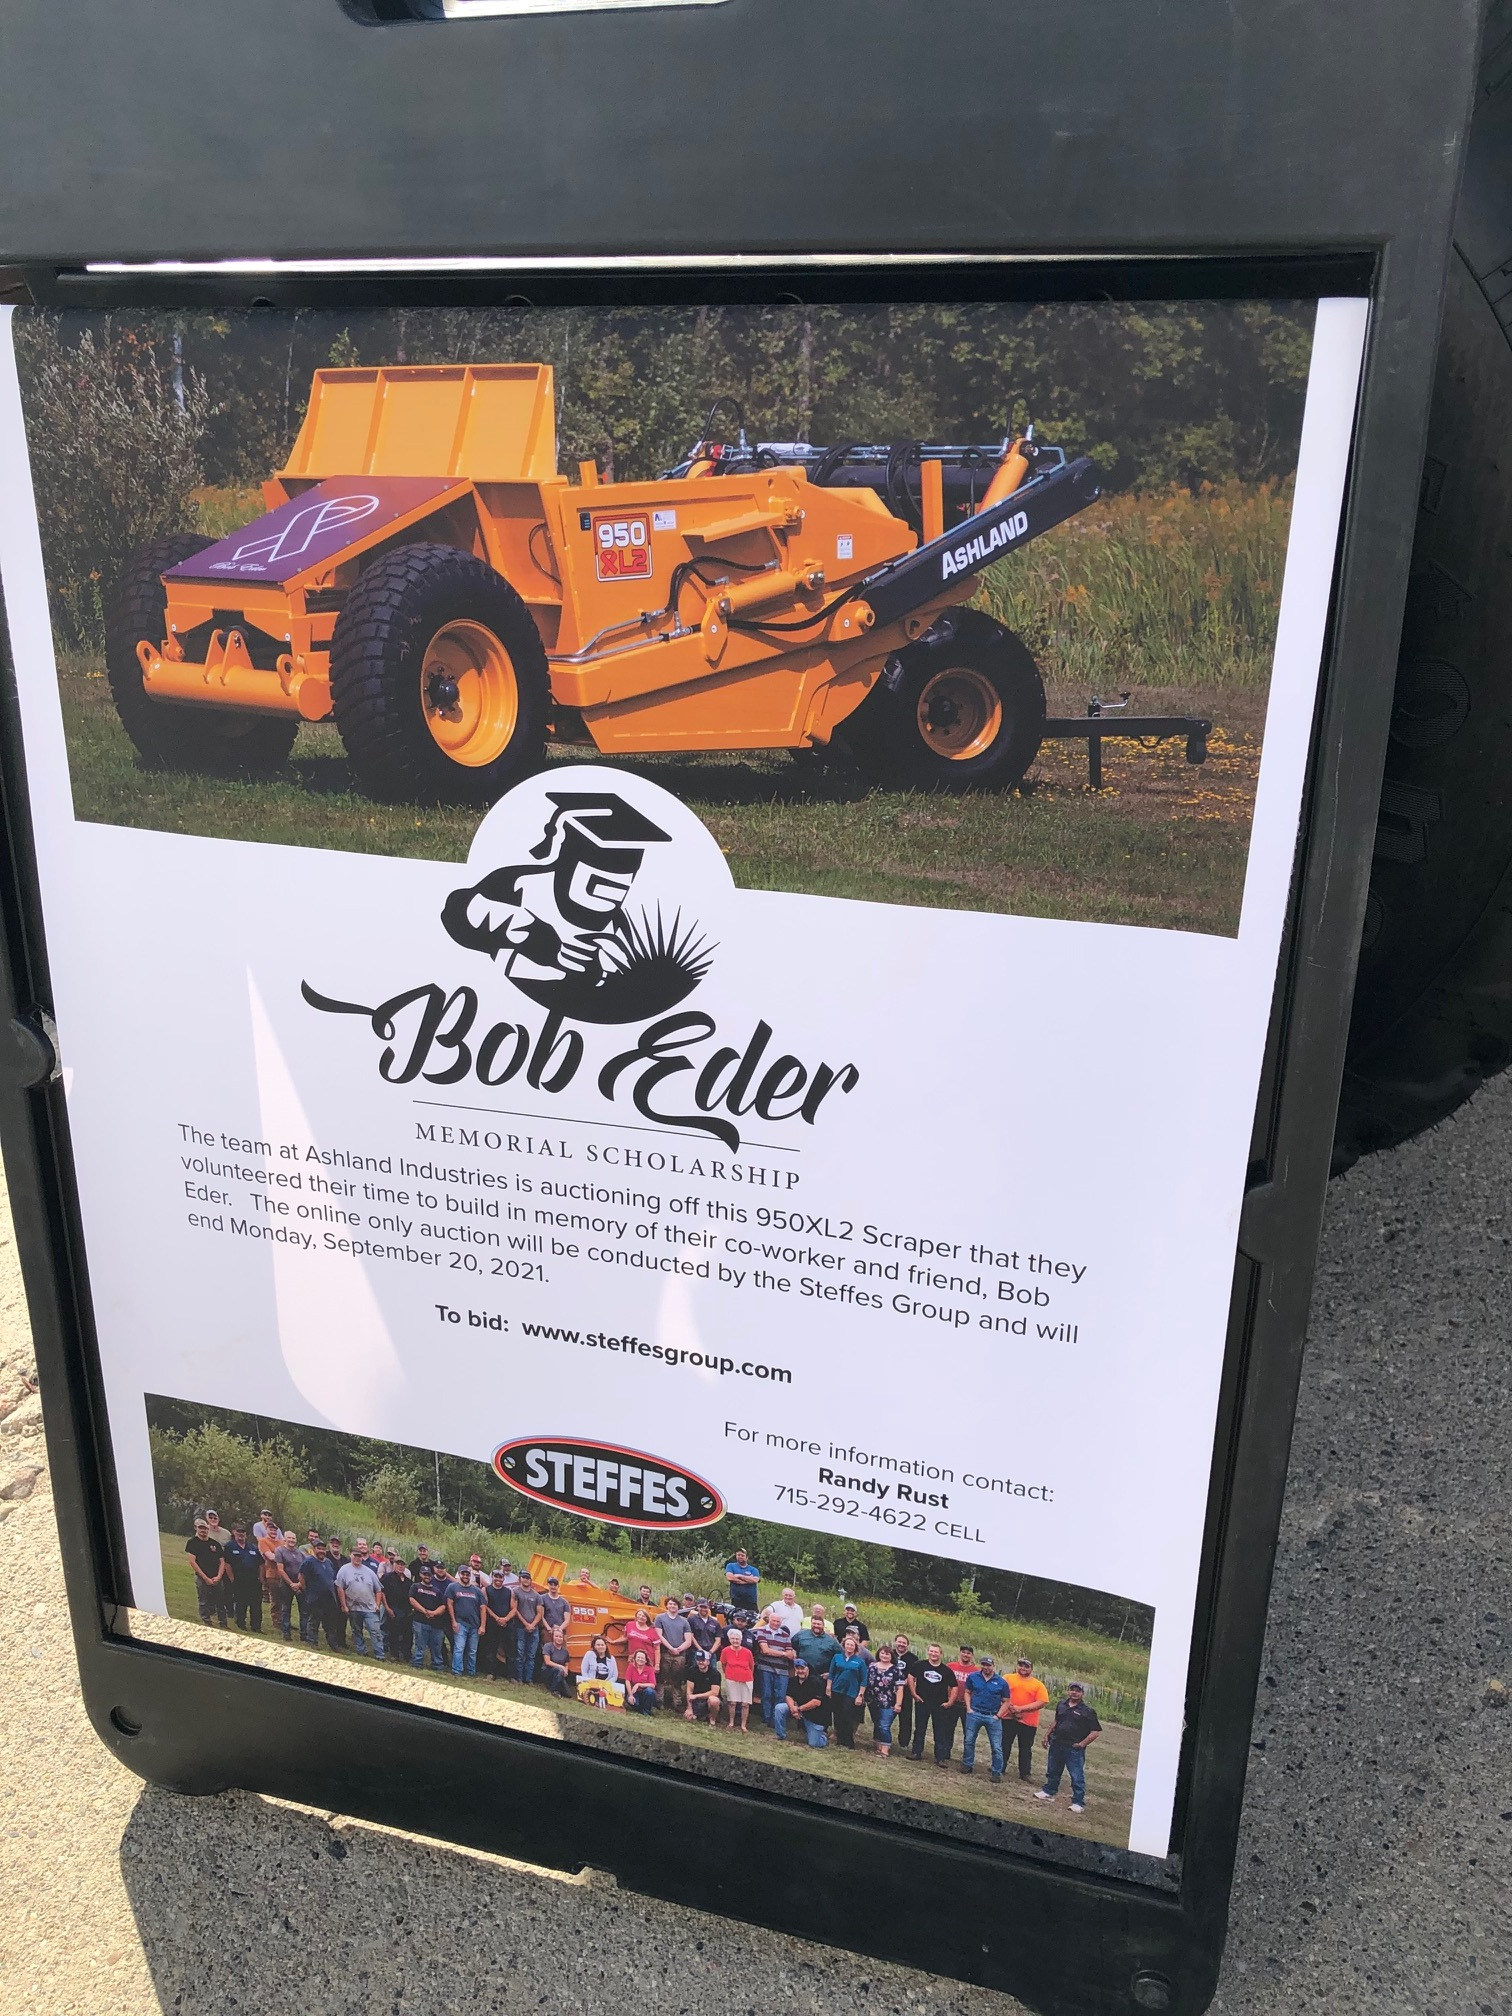 Big Iron:  Ashland Industries honors memory of Bob Eder with earthmover auction and scholarship